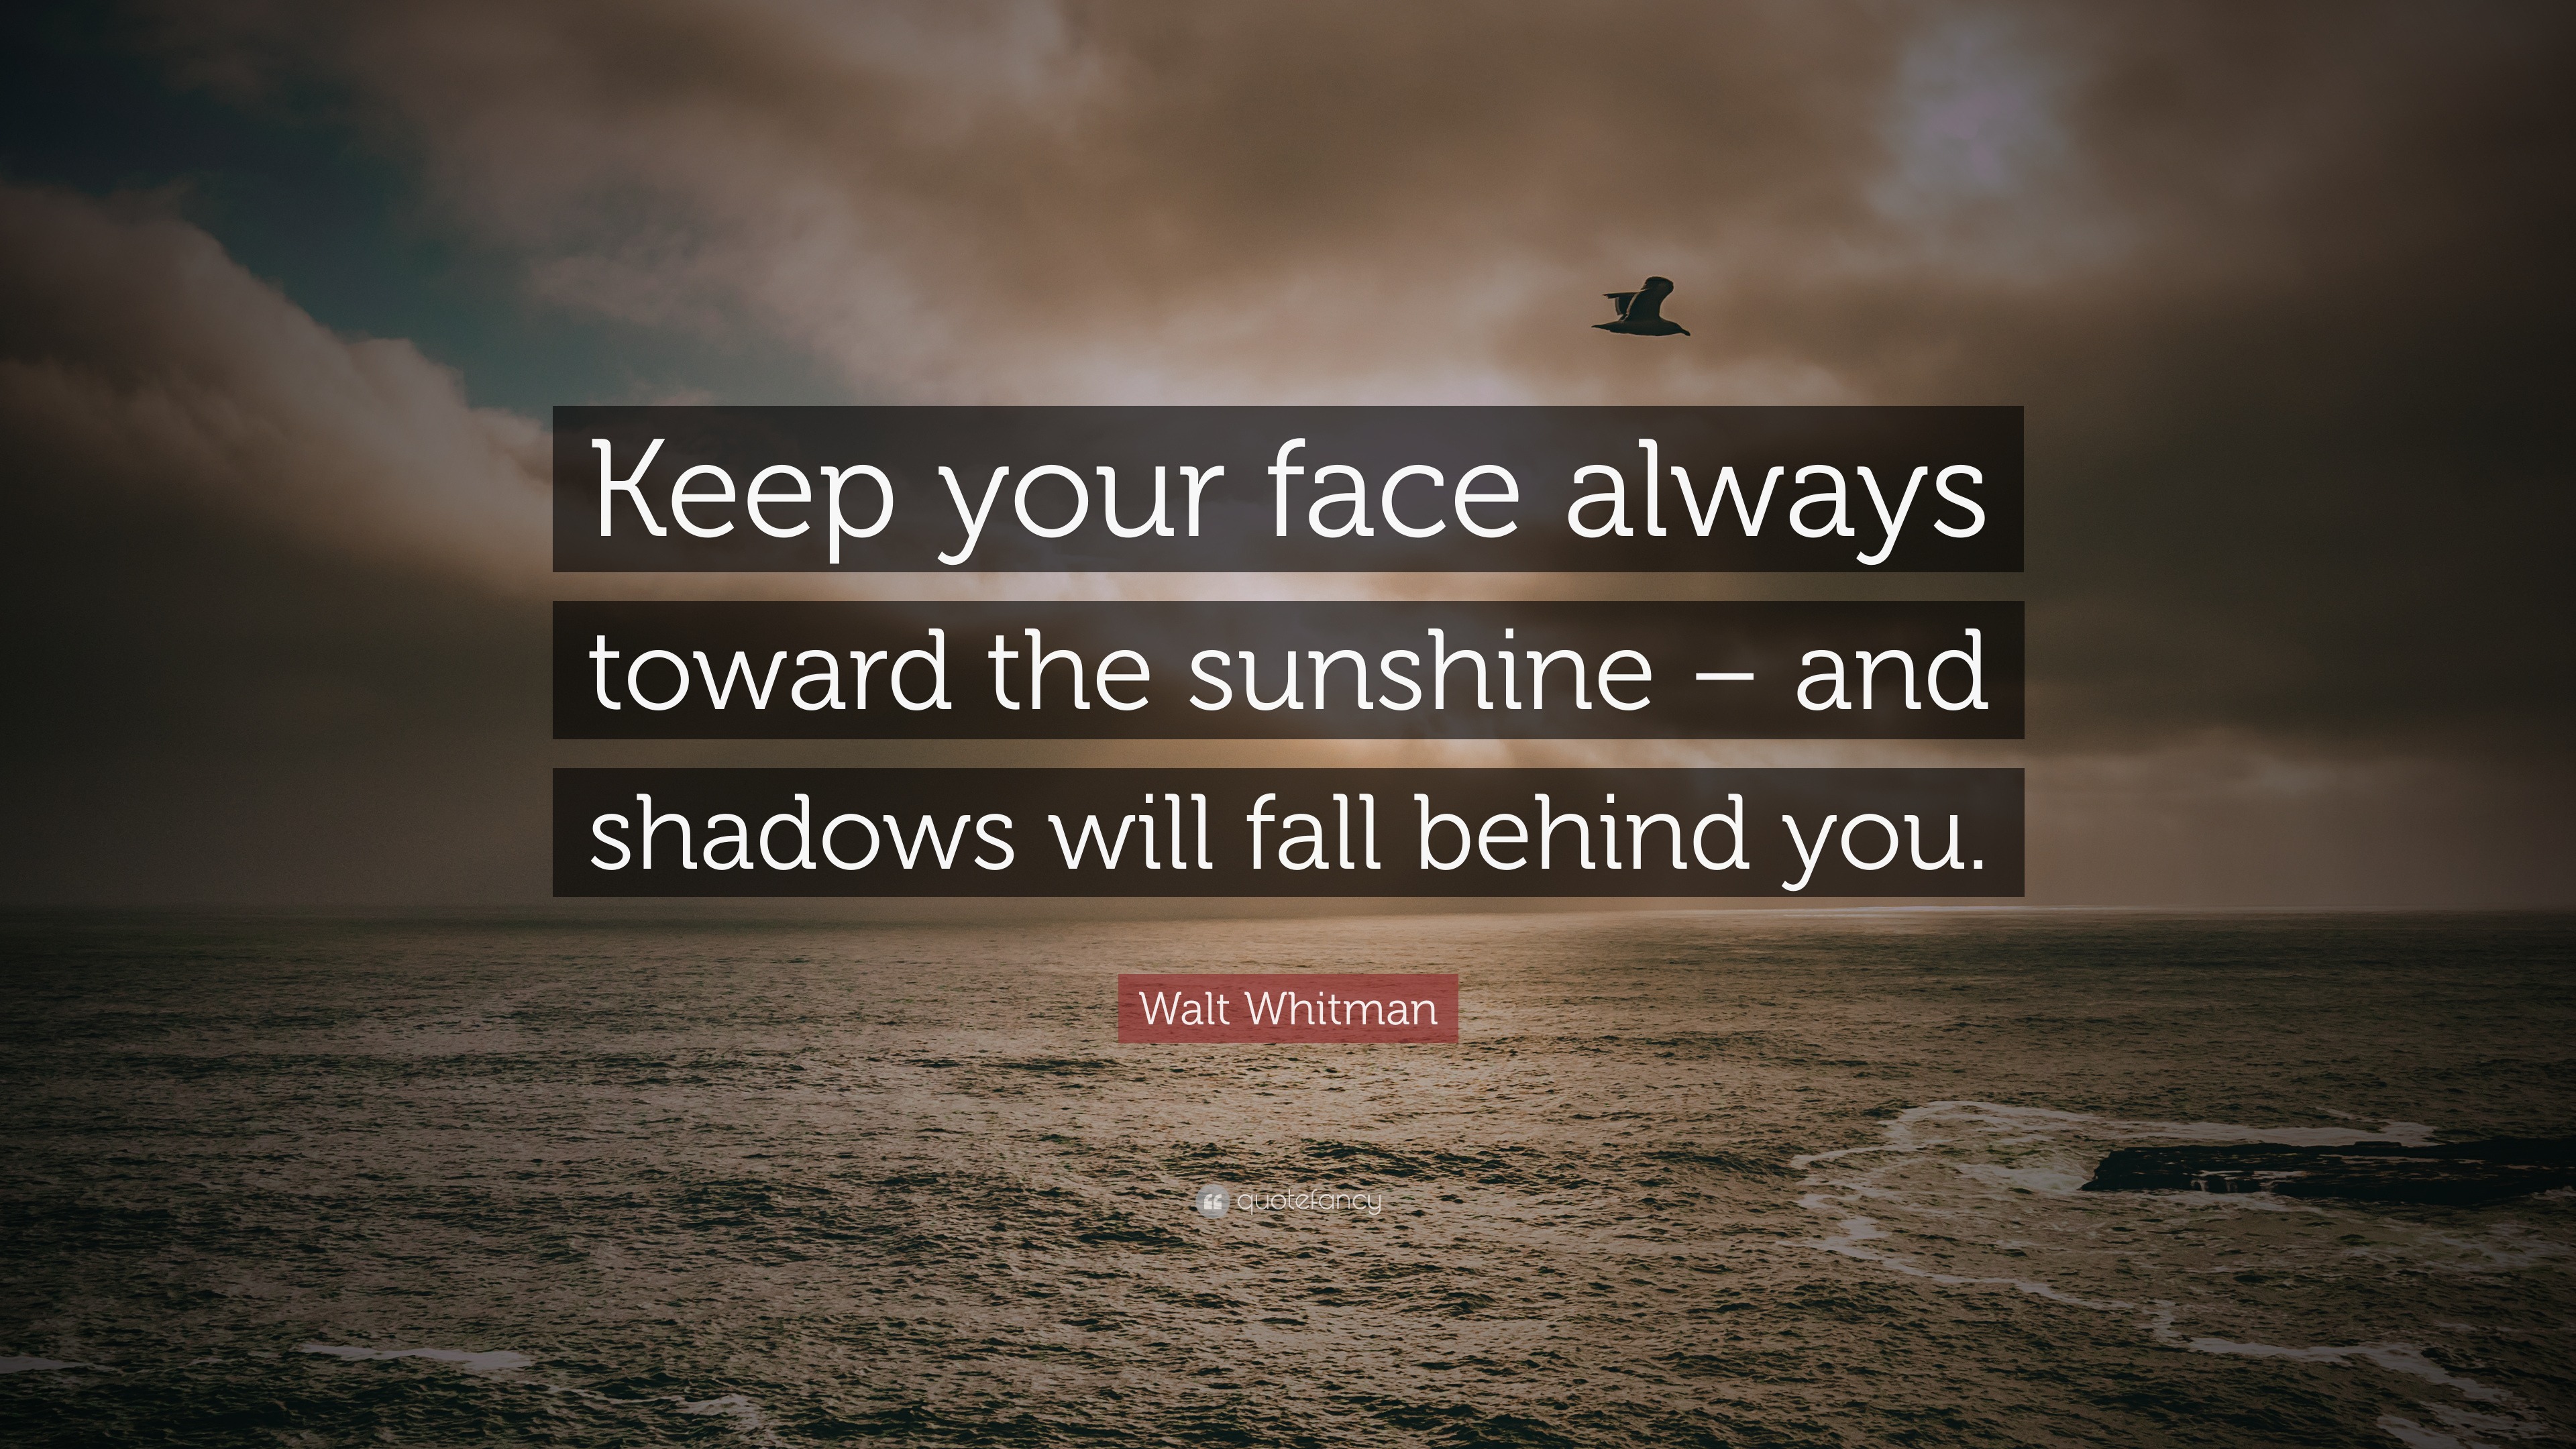 Keep your face always toward the sunshine - and shadows will fall behind yo...